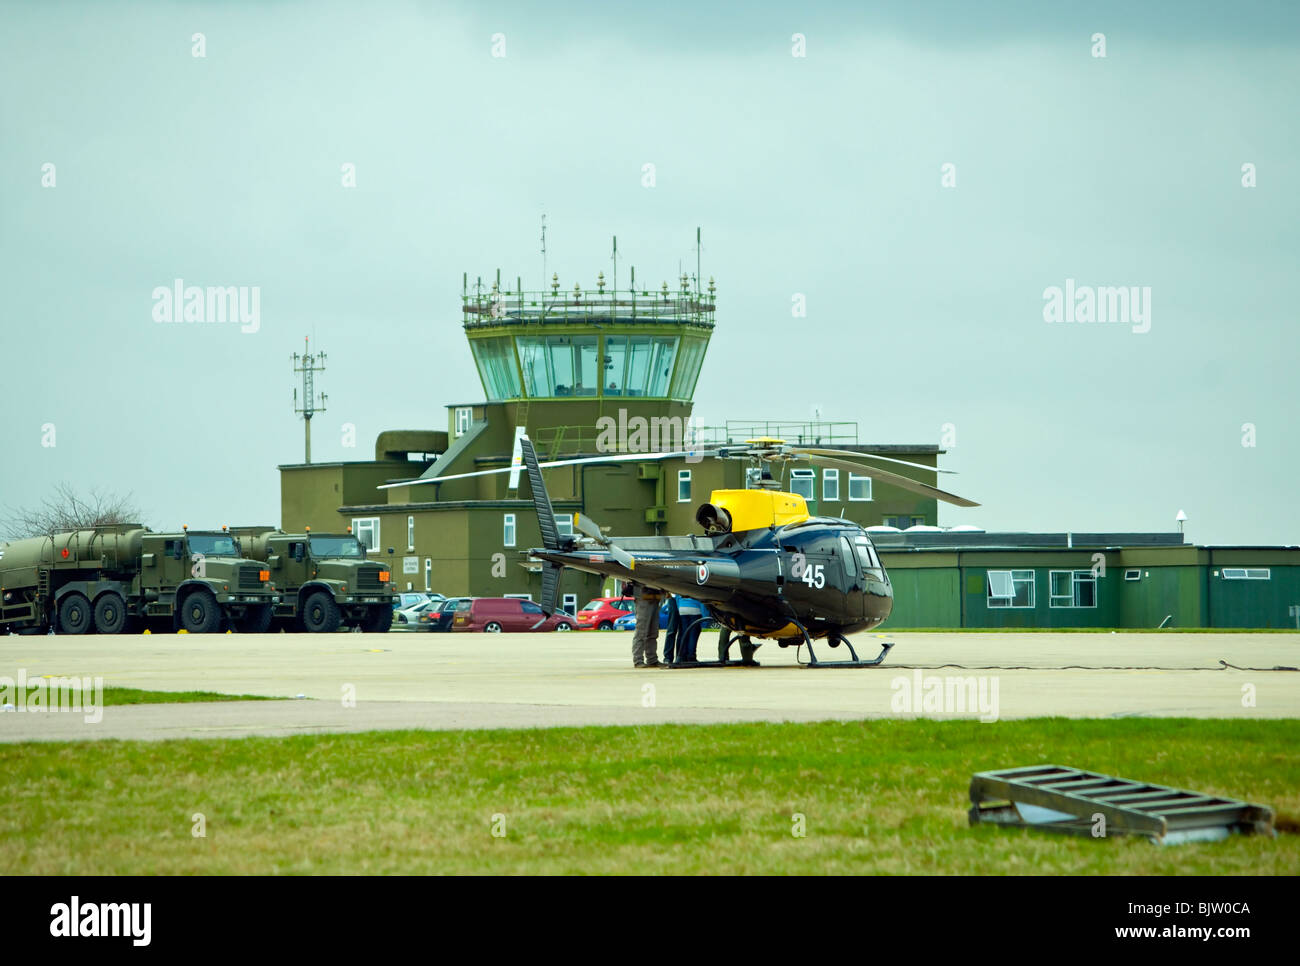 Air Traffic Control Tower Wattisham Airfield Suffolk With An Army Air Corps Squirrel Helicopter In The Foreground Stock Photo